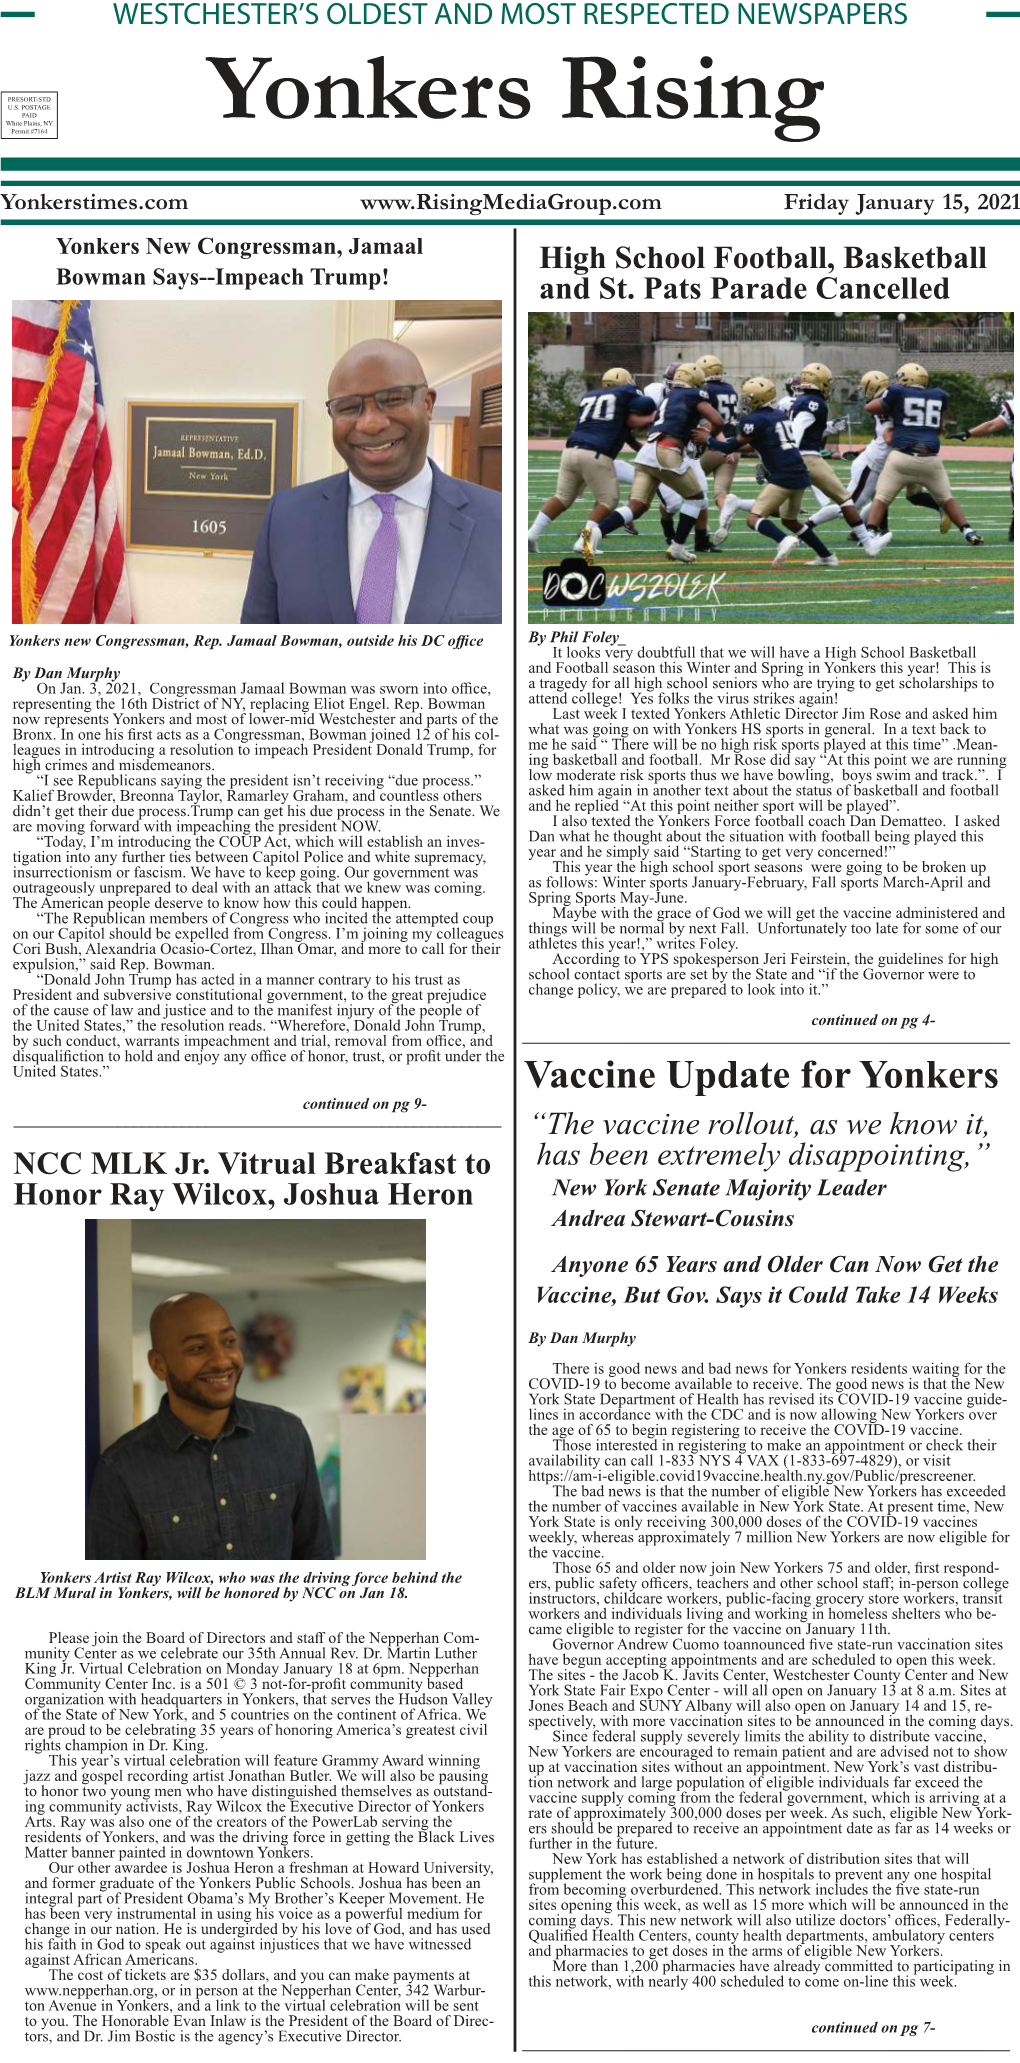 Vaccine Update for Yonkers Continued on Pg 9- ______“The Vaccine Rollout, As We Know It, NCC MLK Jr